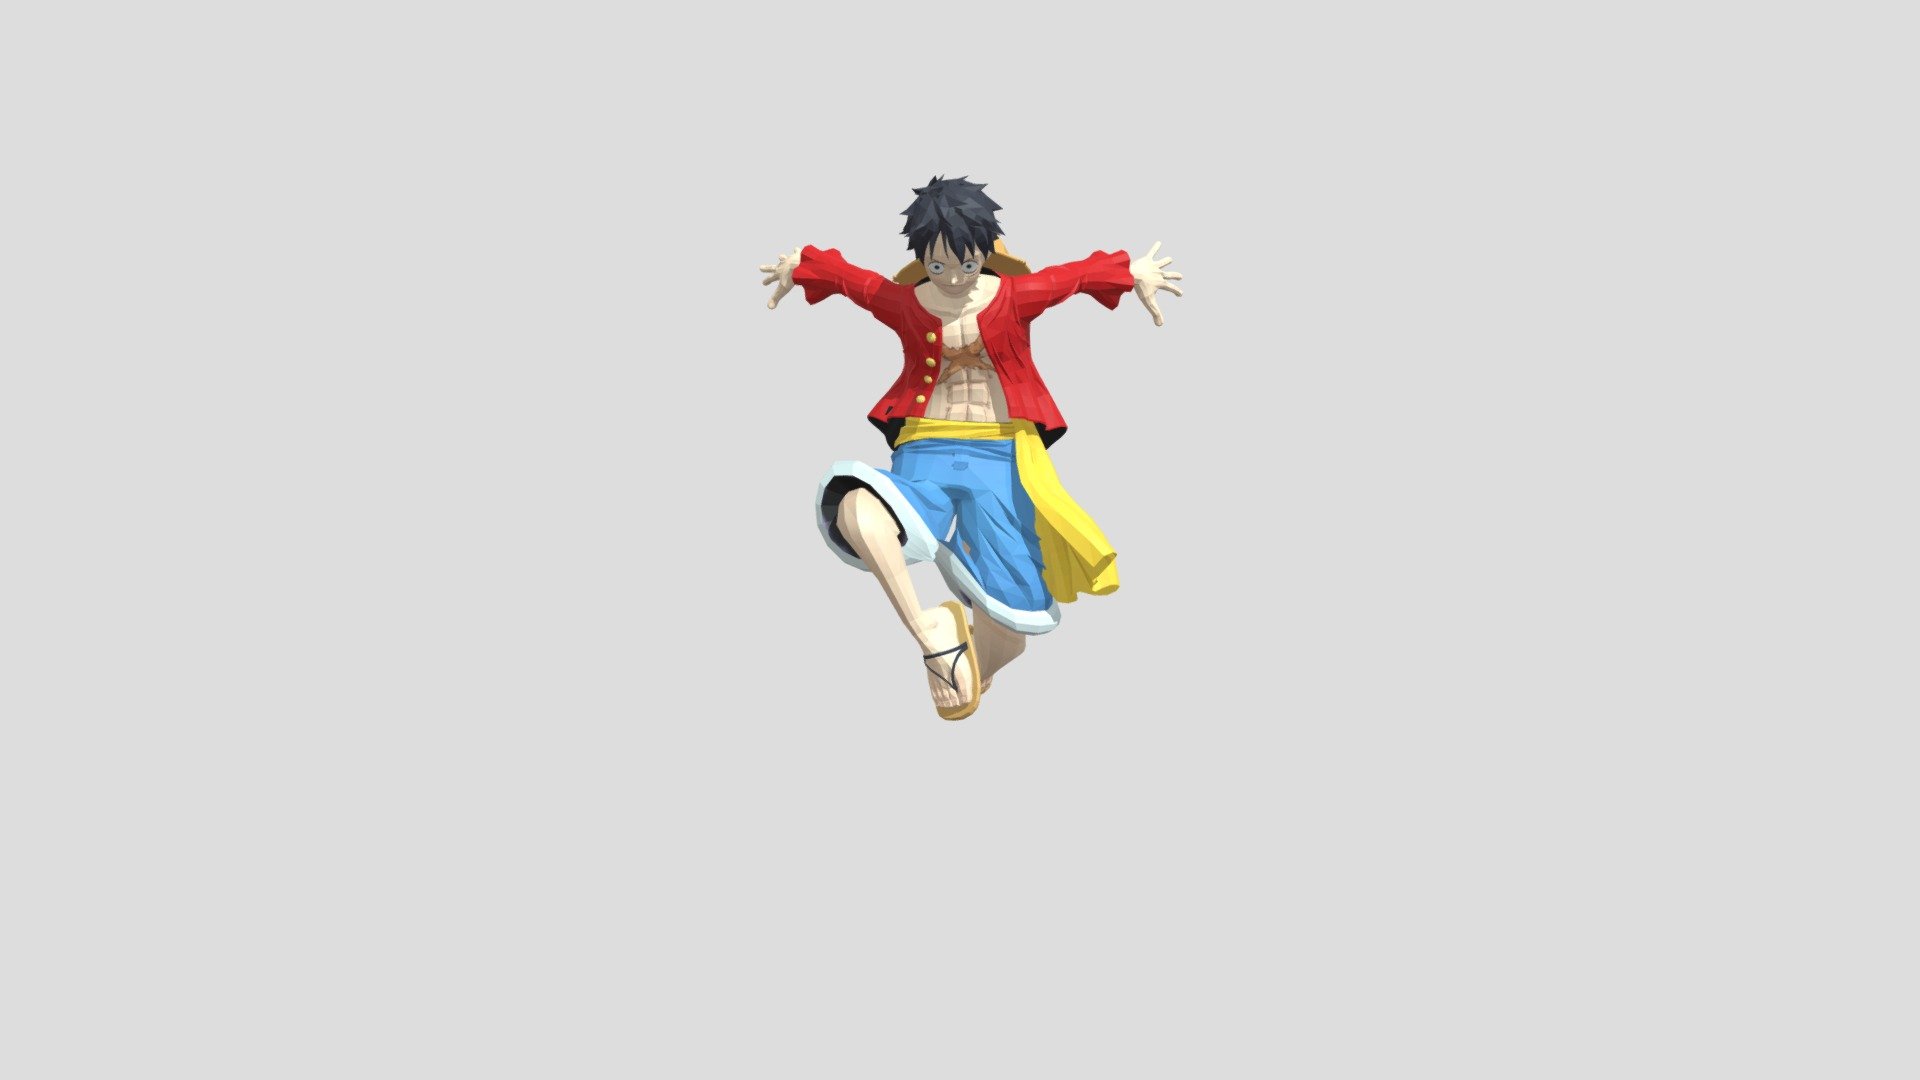 One Piece Luffy Adventure Map - 2000-2020 - 3D model by kane_sk06